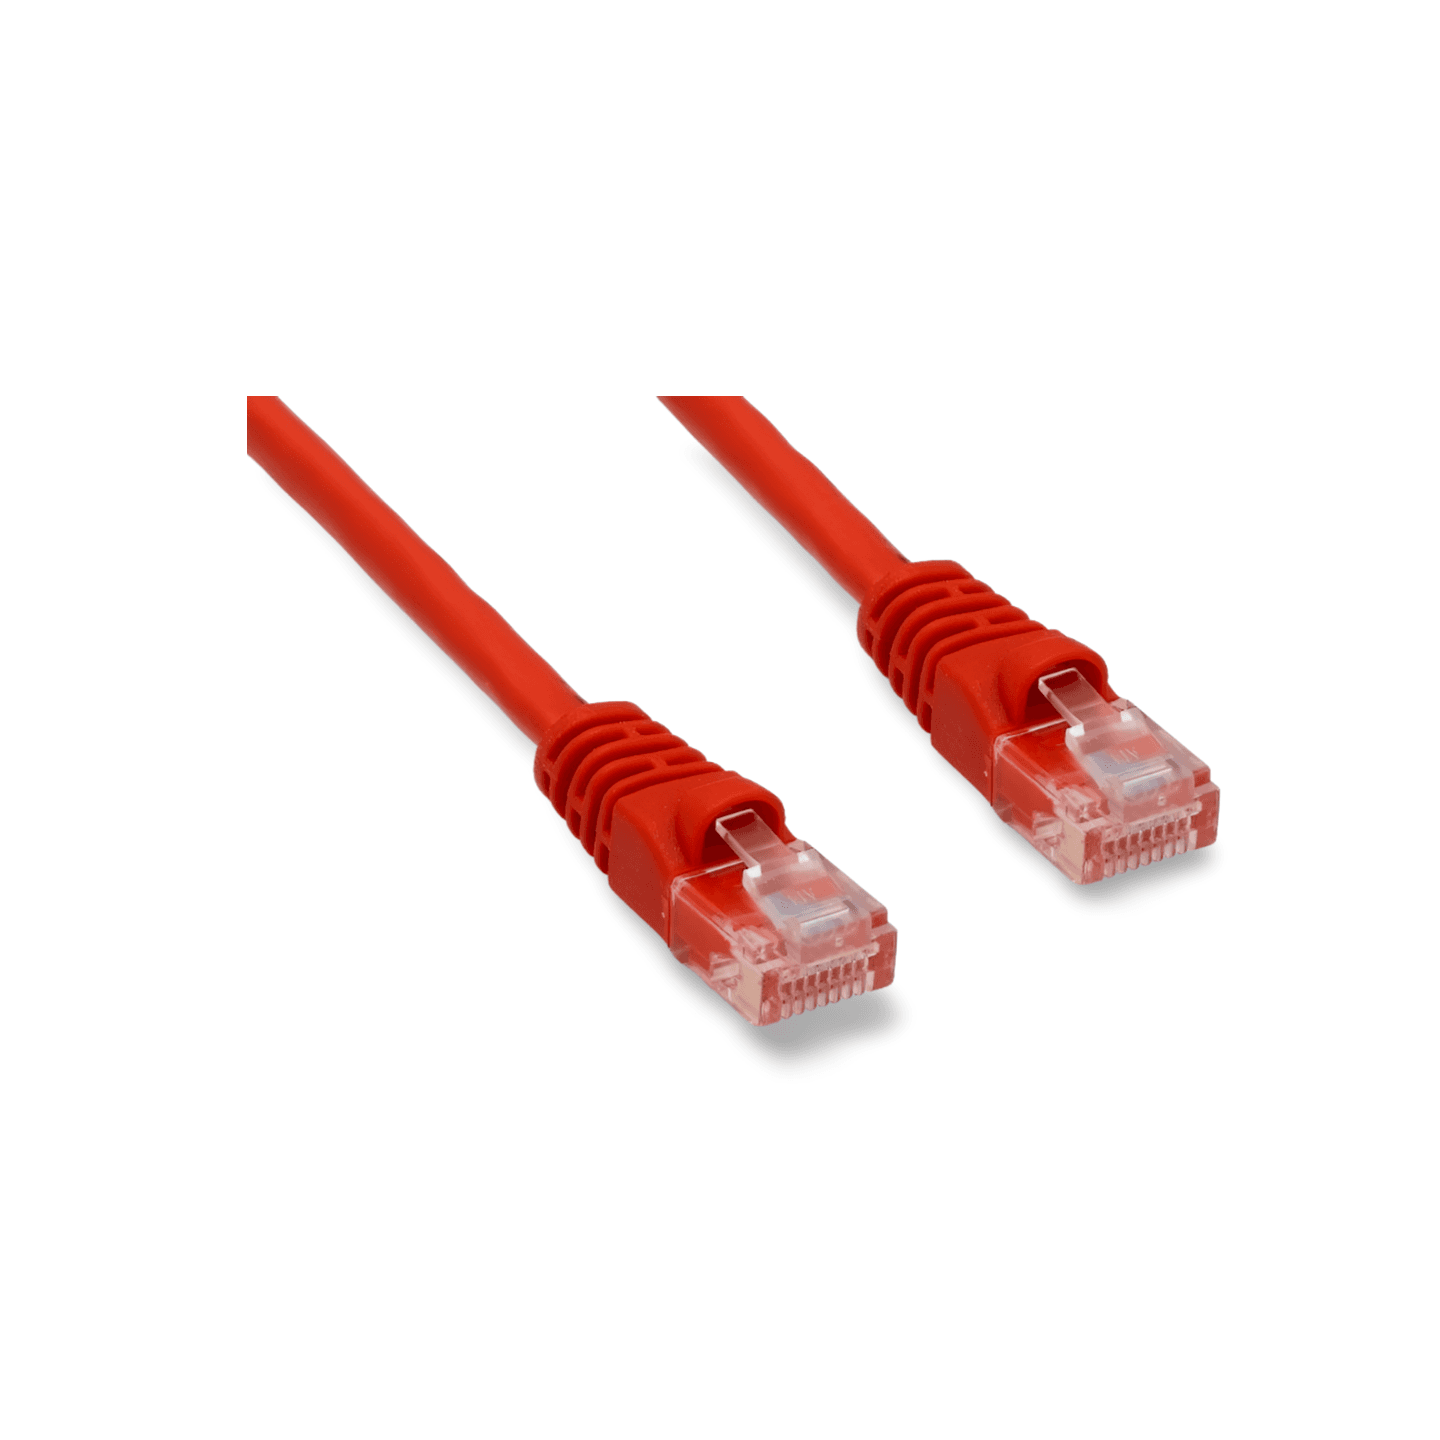 3ft Cat6 Ethernet Gigabit Crossover Network Cable RJ45 4 Pair red